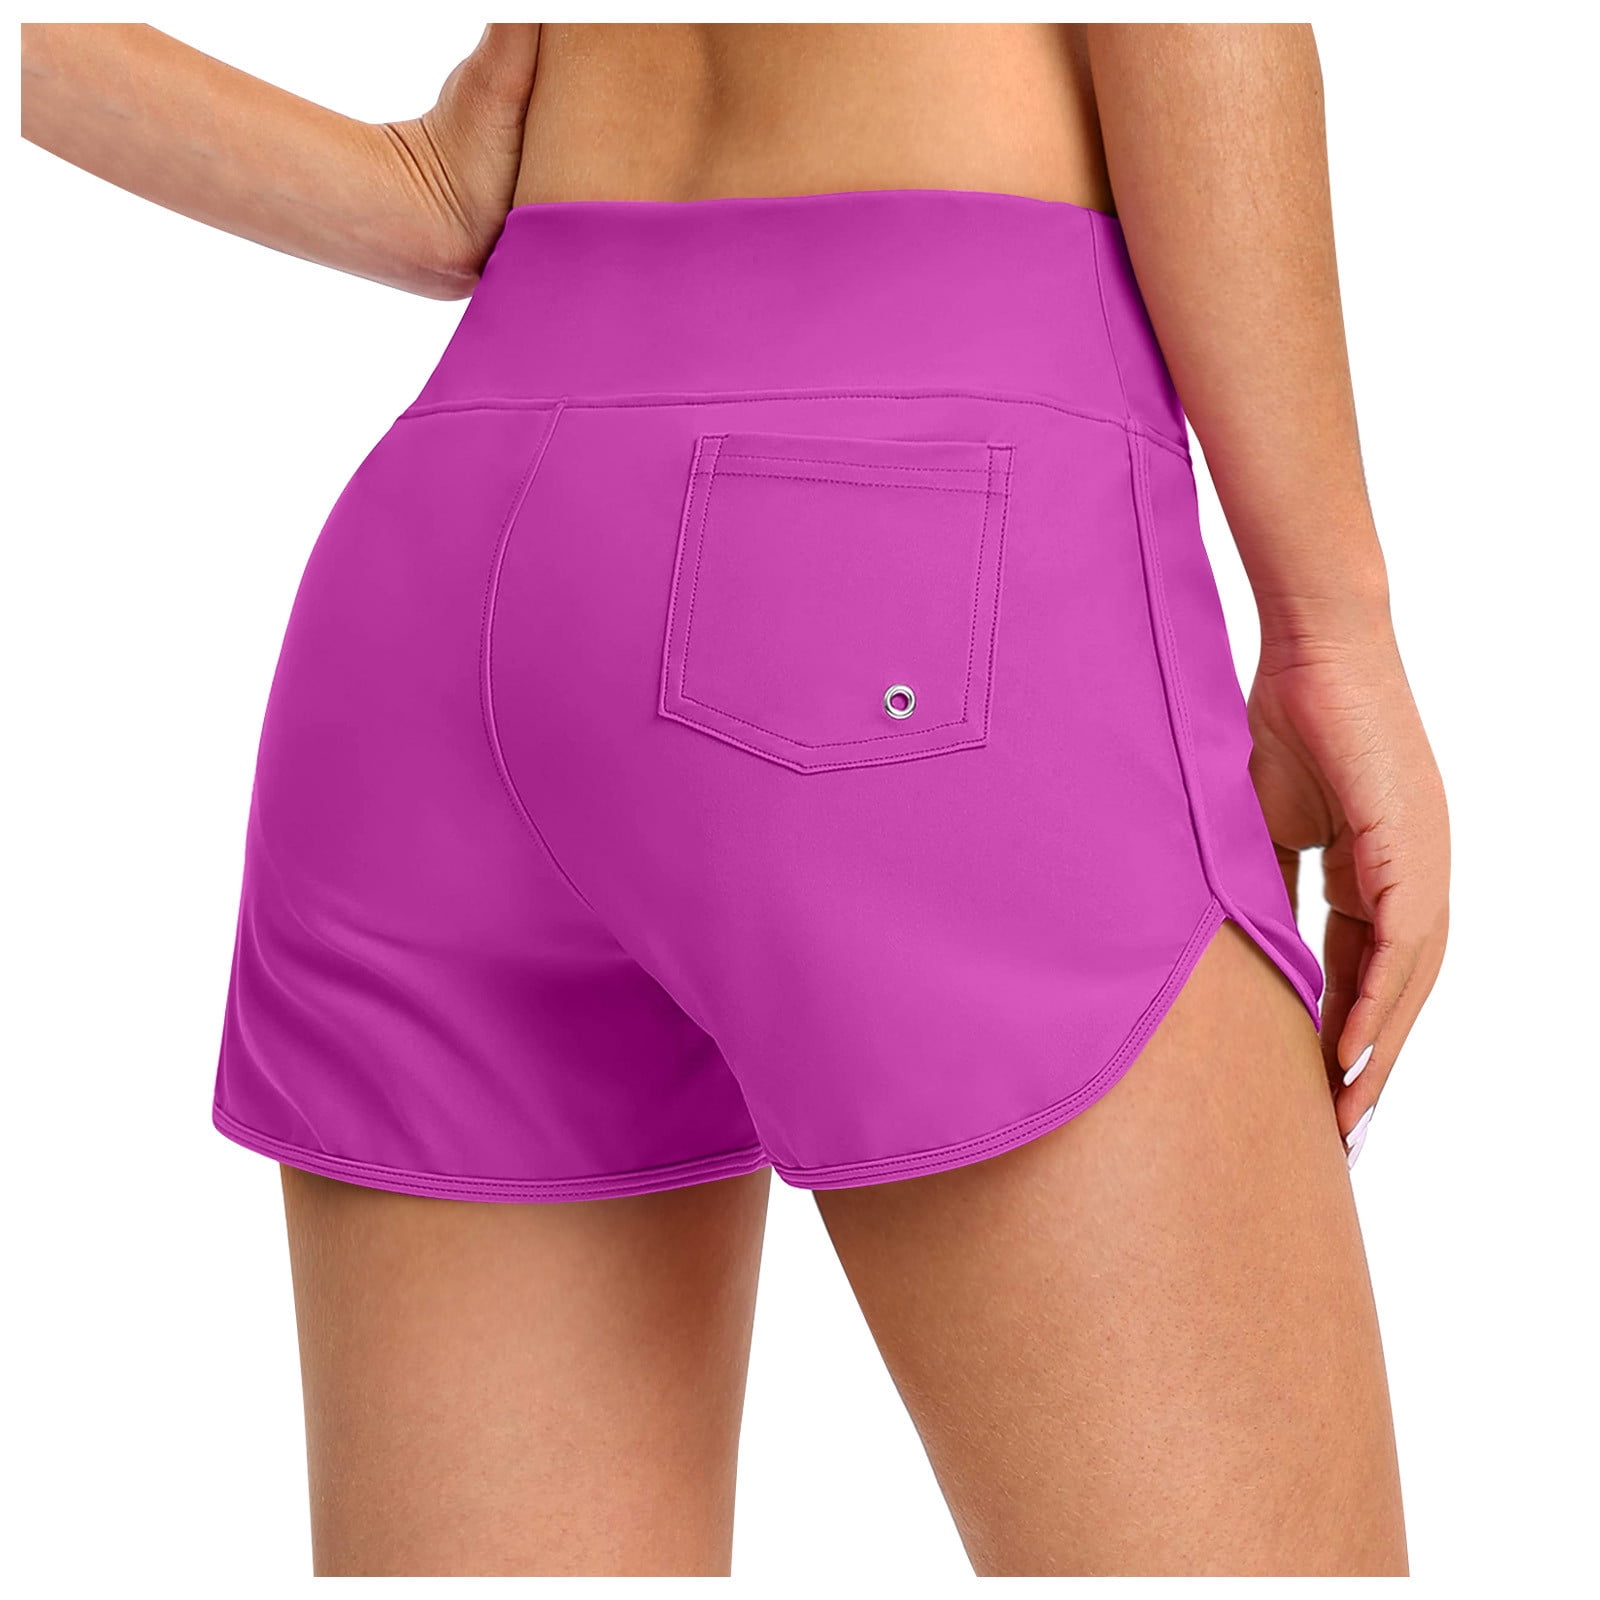 Women's Swim Shorts With Pockets High Waisted Tummy Control Swimsuit  Bathing Beach Board Biker Shorts Active Pants 